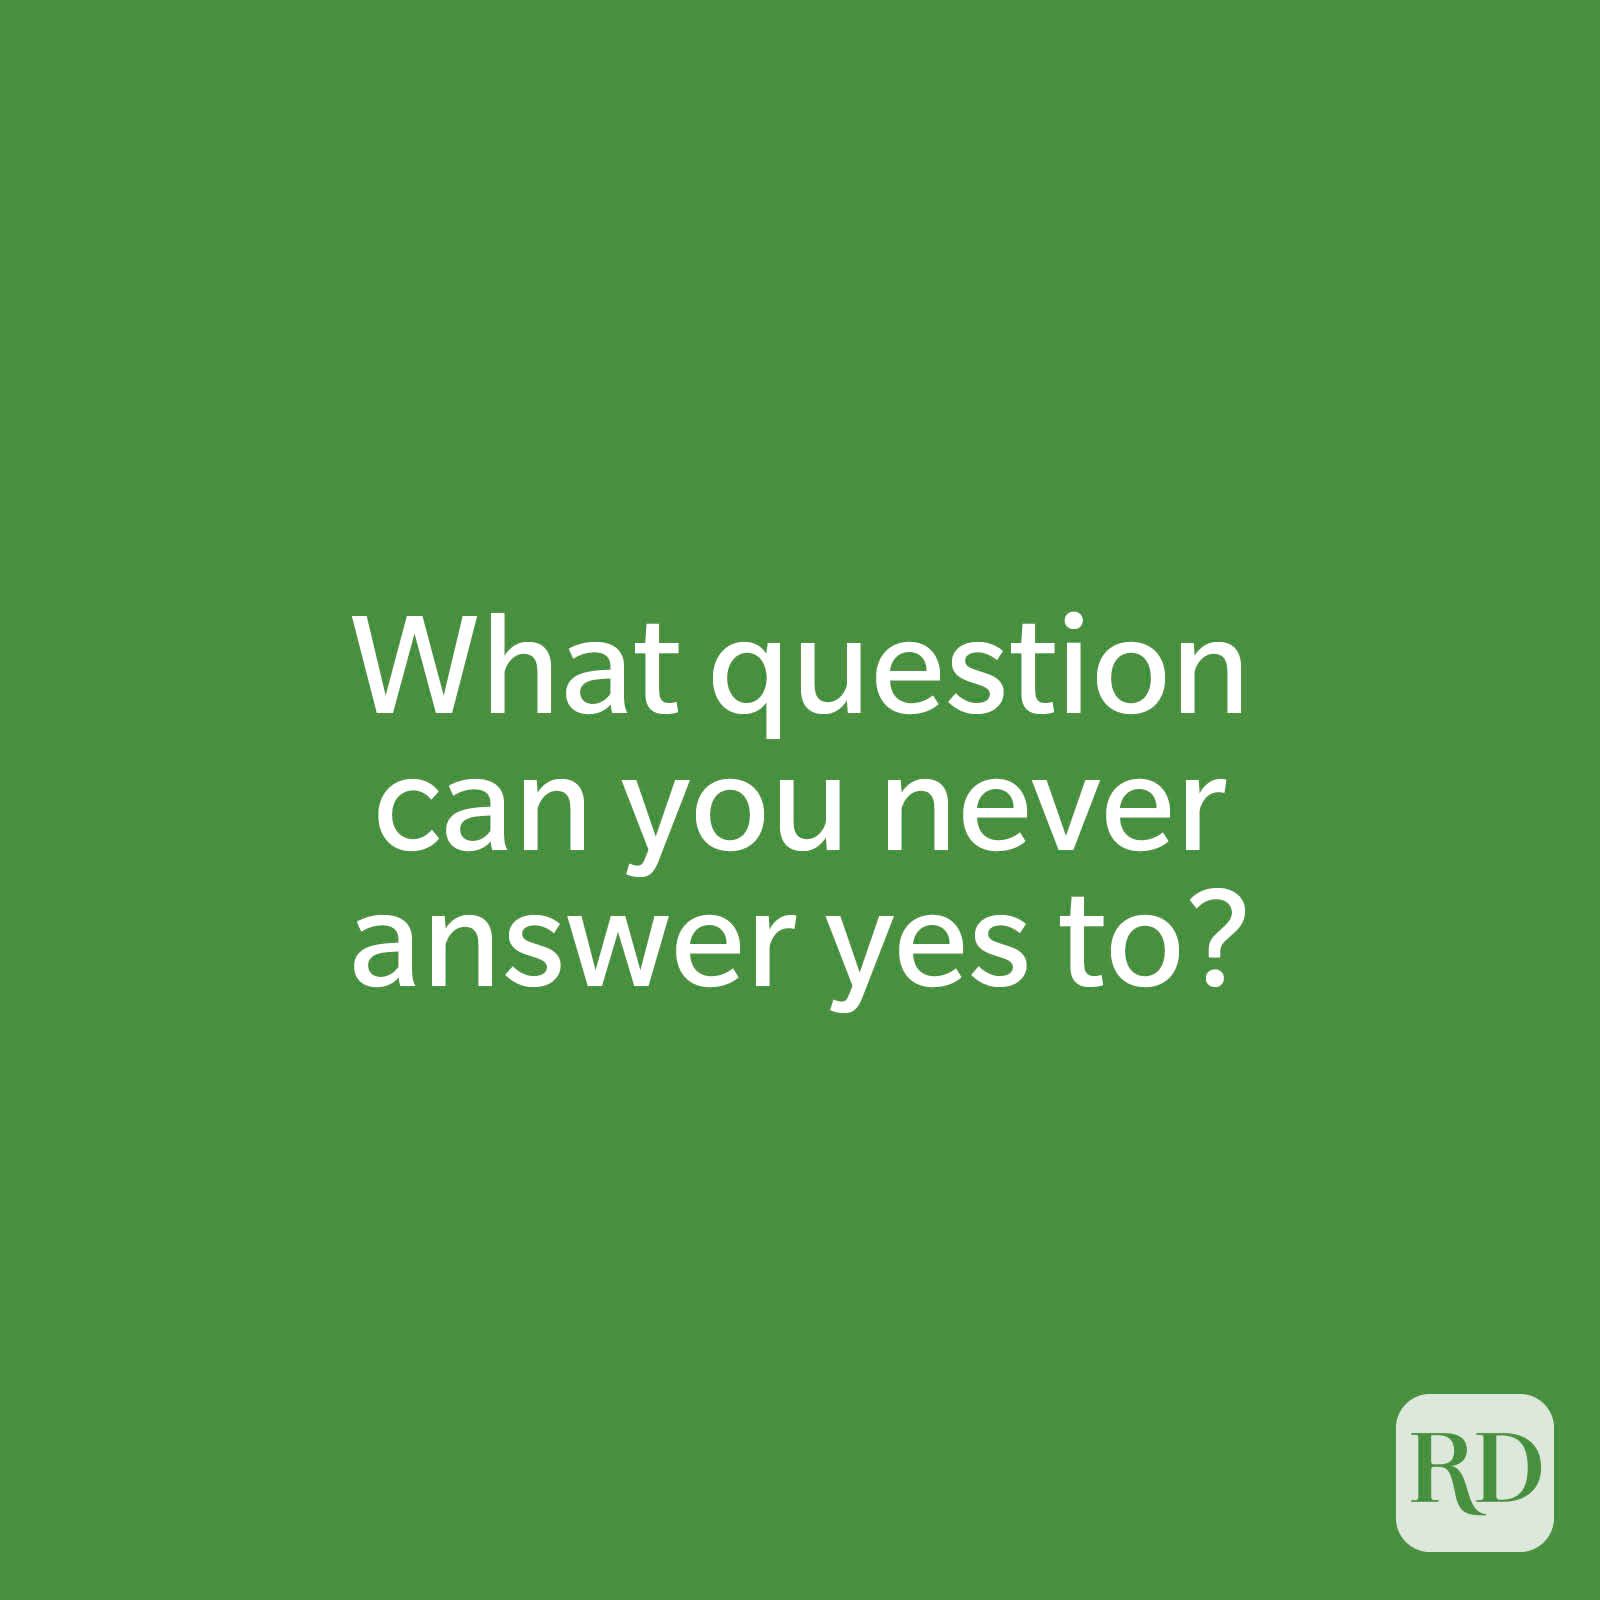 50 Easy Riddles (with Answers) Anyone Can Solve | Reader's Digest